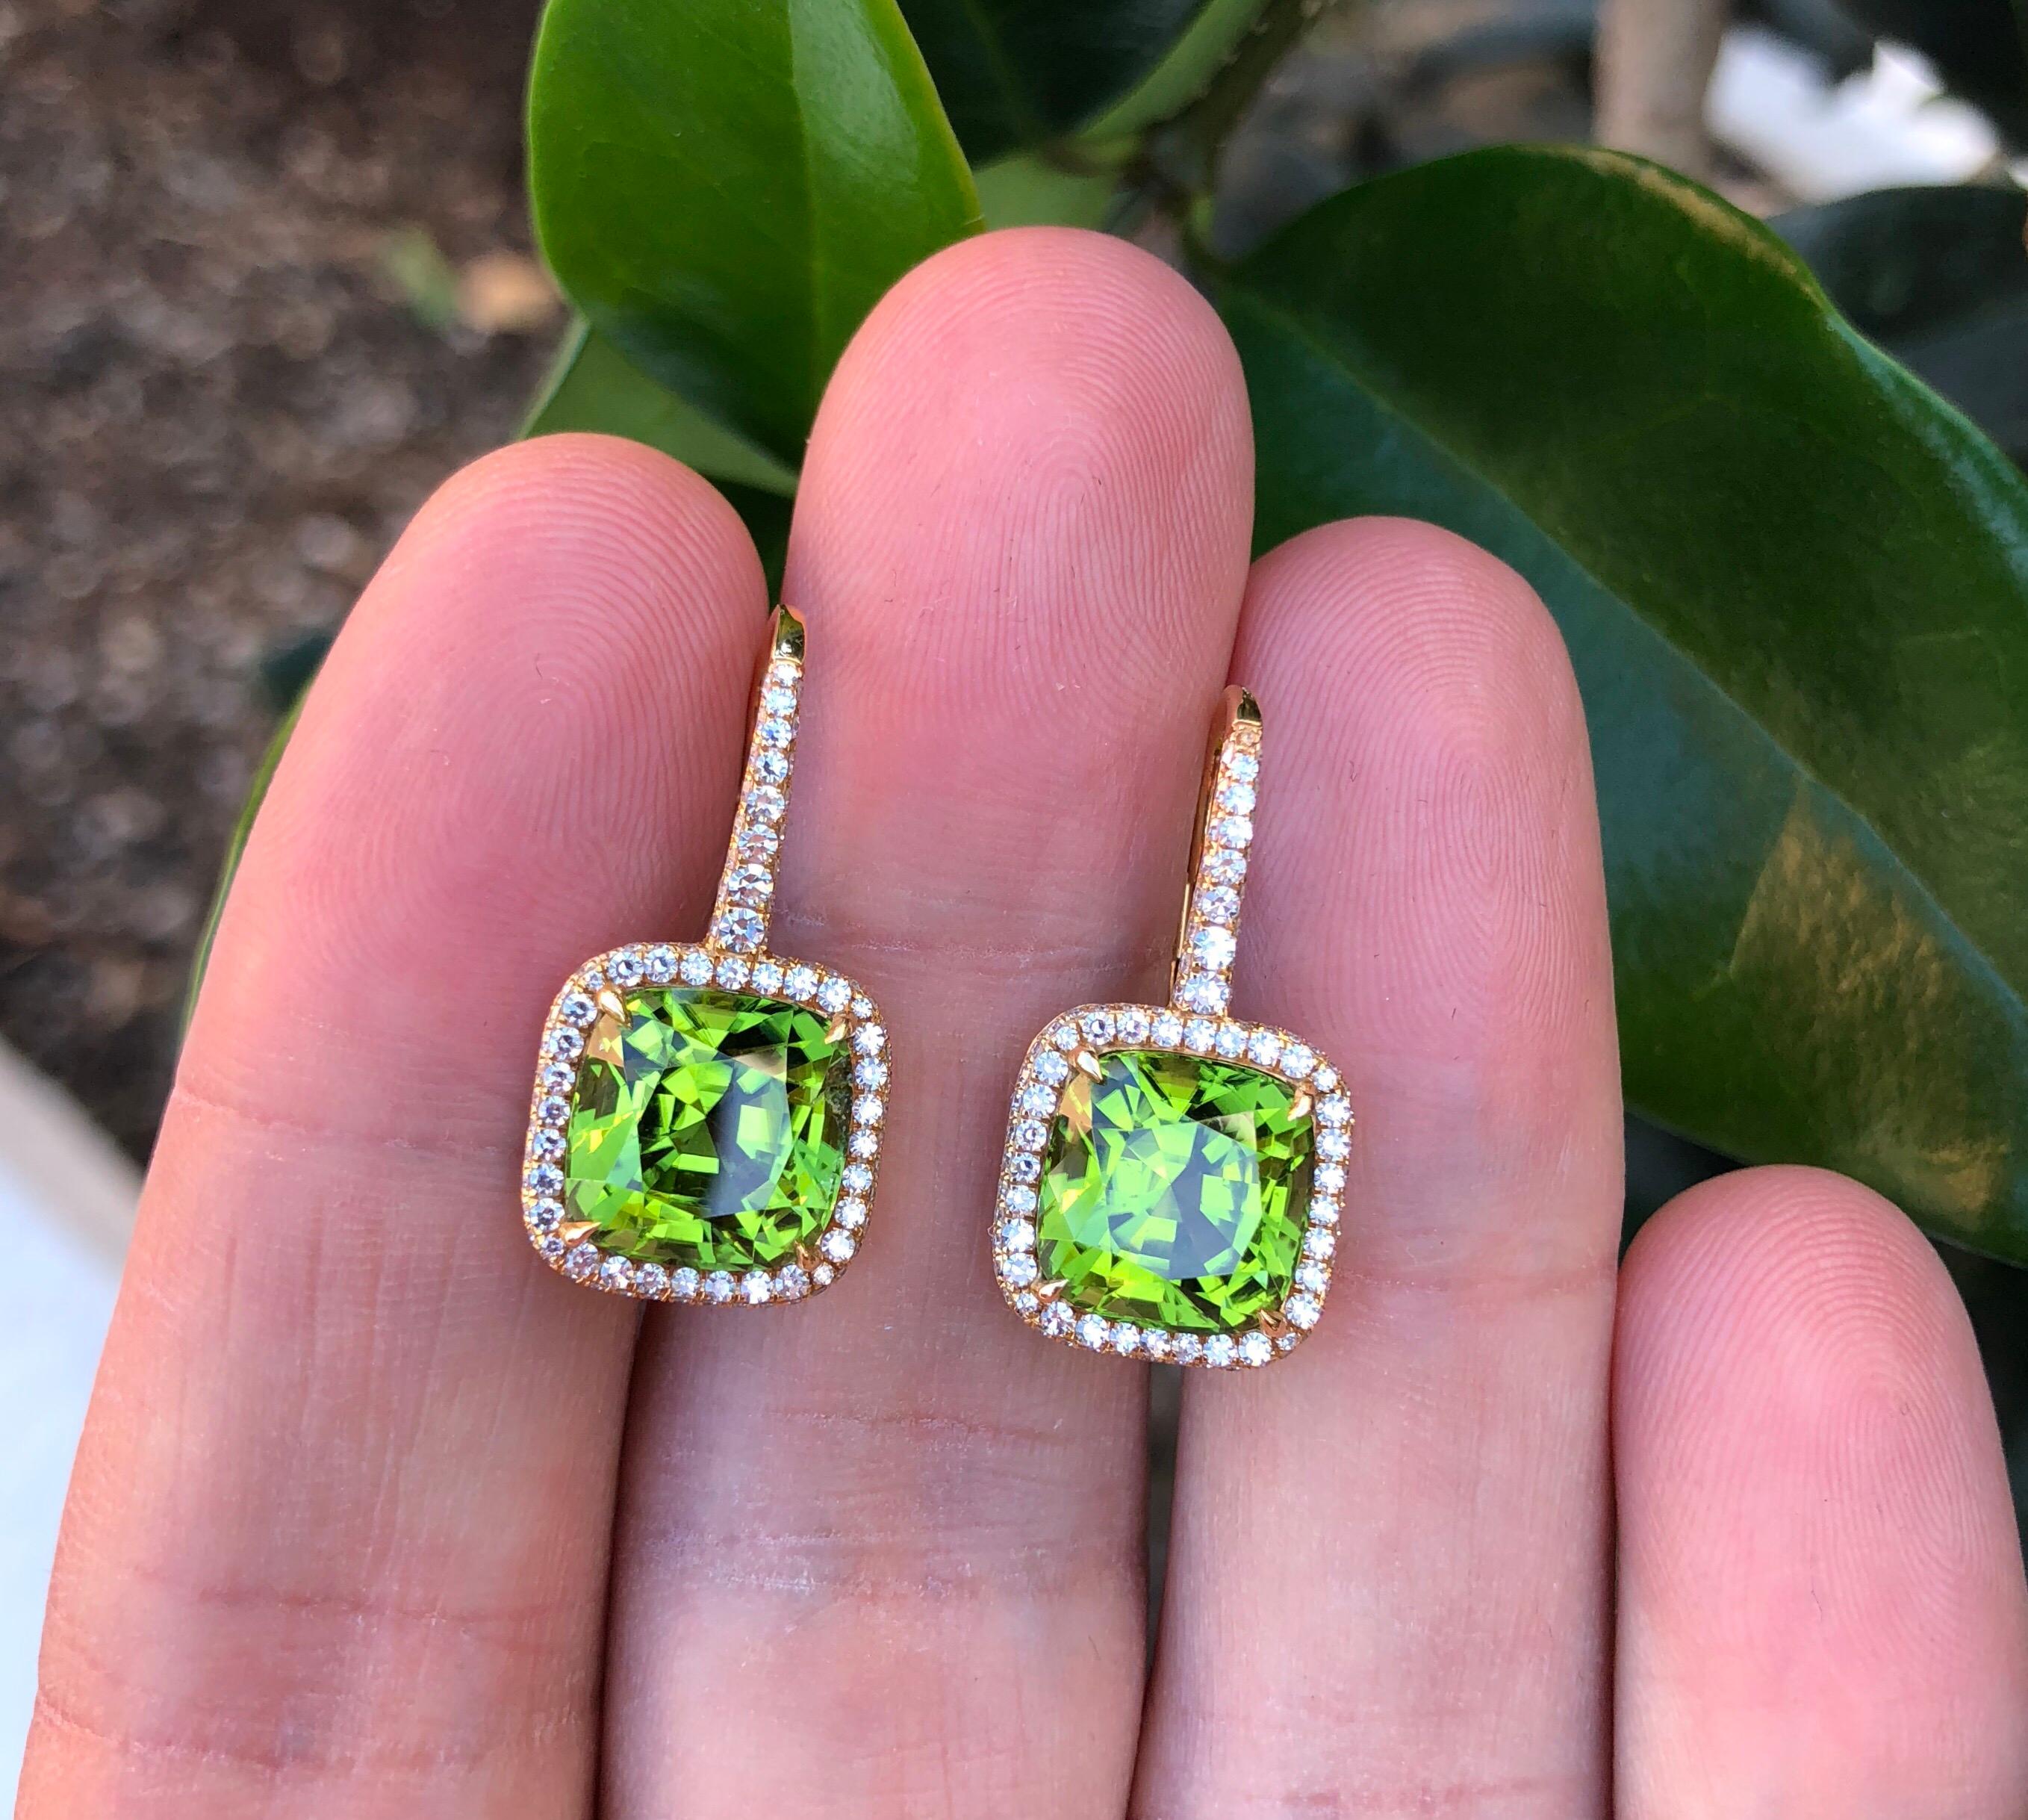 An ultra fine pair of 9.46ct total cushion-cut green Peridot, set in French rose gold and surrounded by 0.94ct F-G color and VS clarity diamonds. 
Signed Tamir.
Crafted by hand in the USA.

***Returns are accepted within 7 days of delivery and will